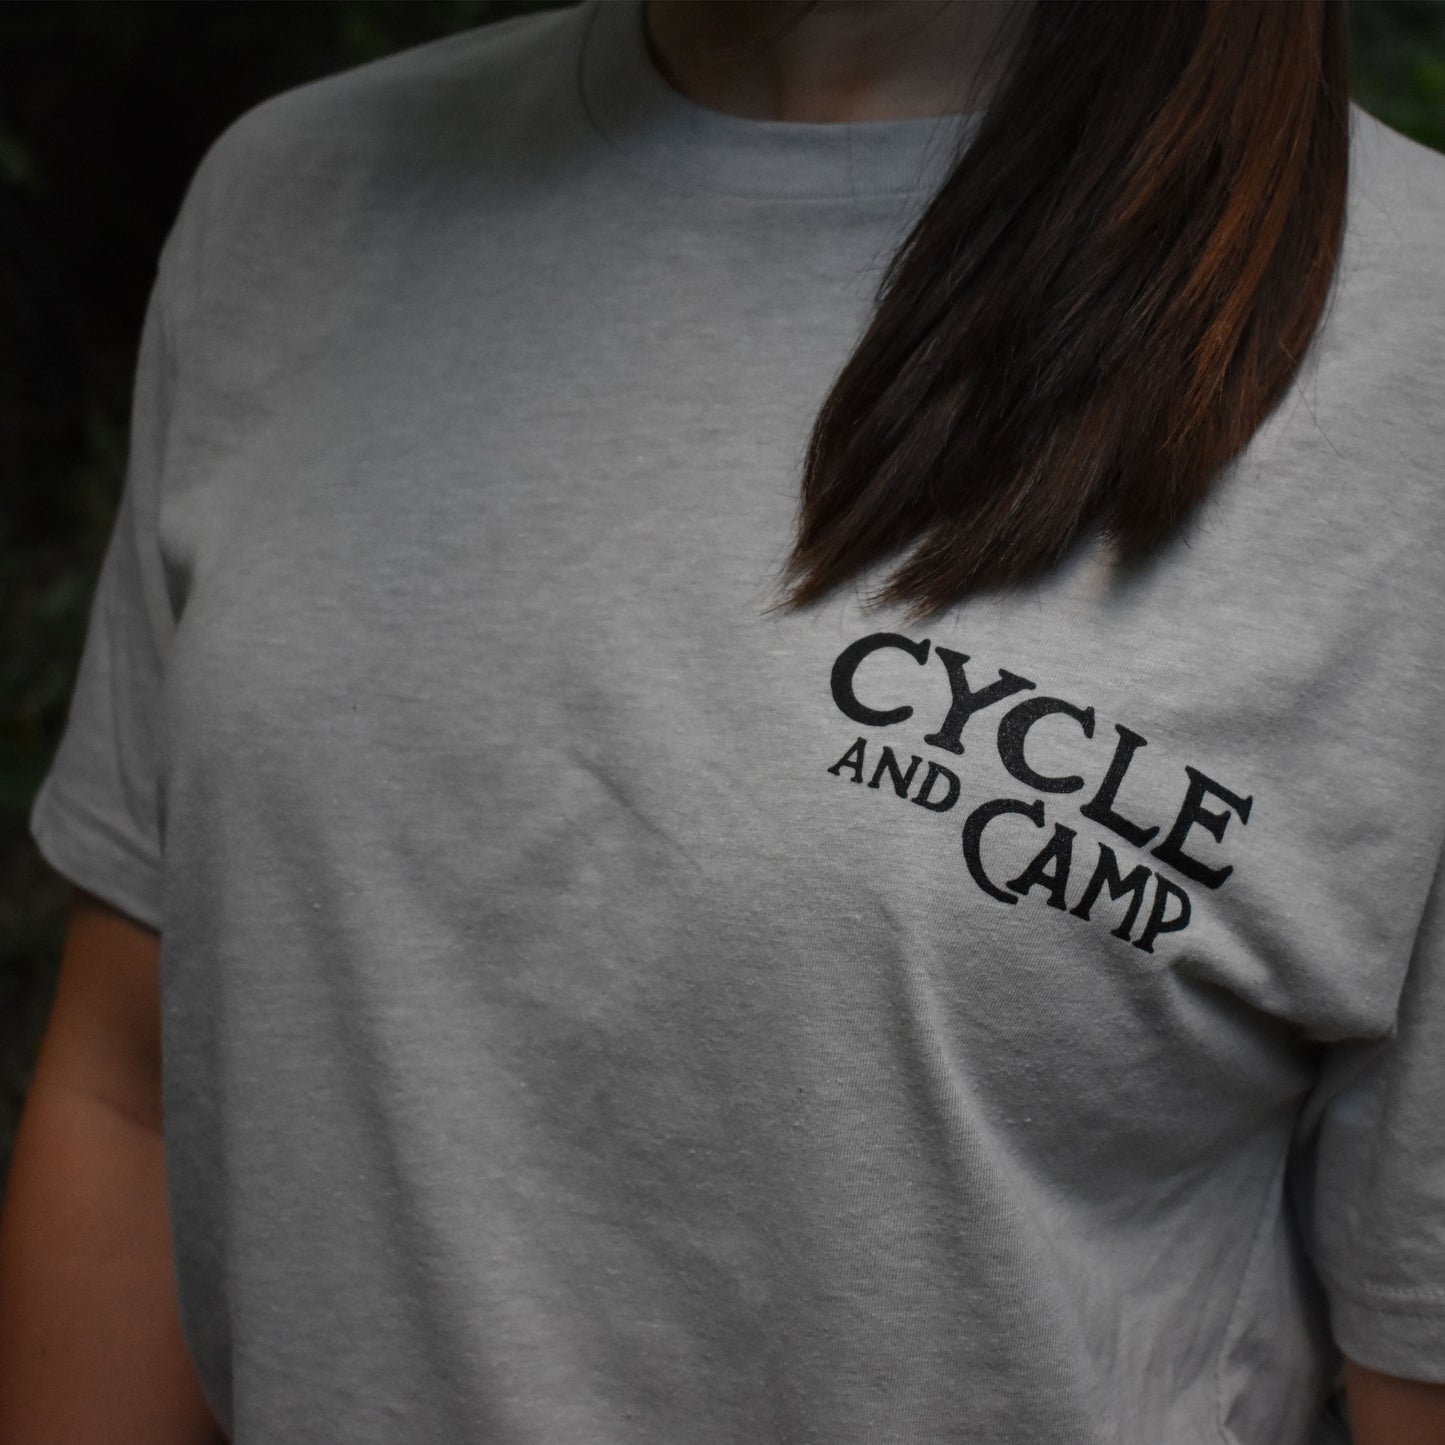 Cycle and Camp T-Shirt